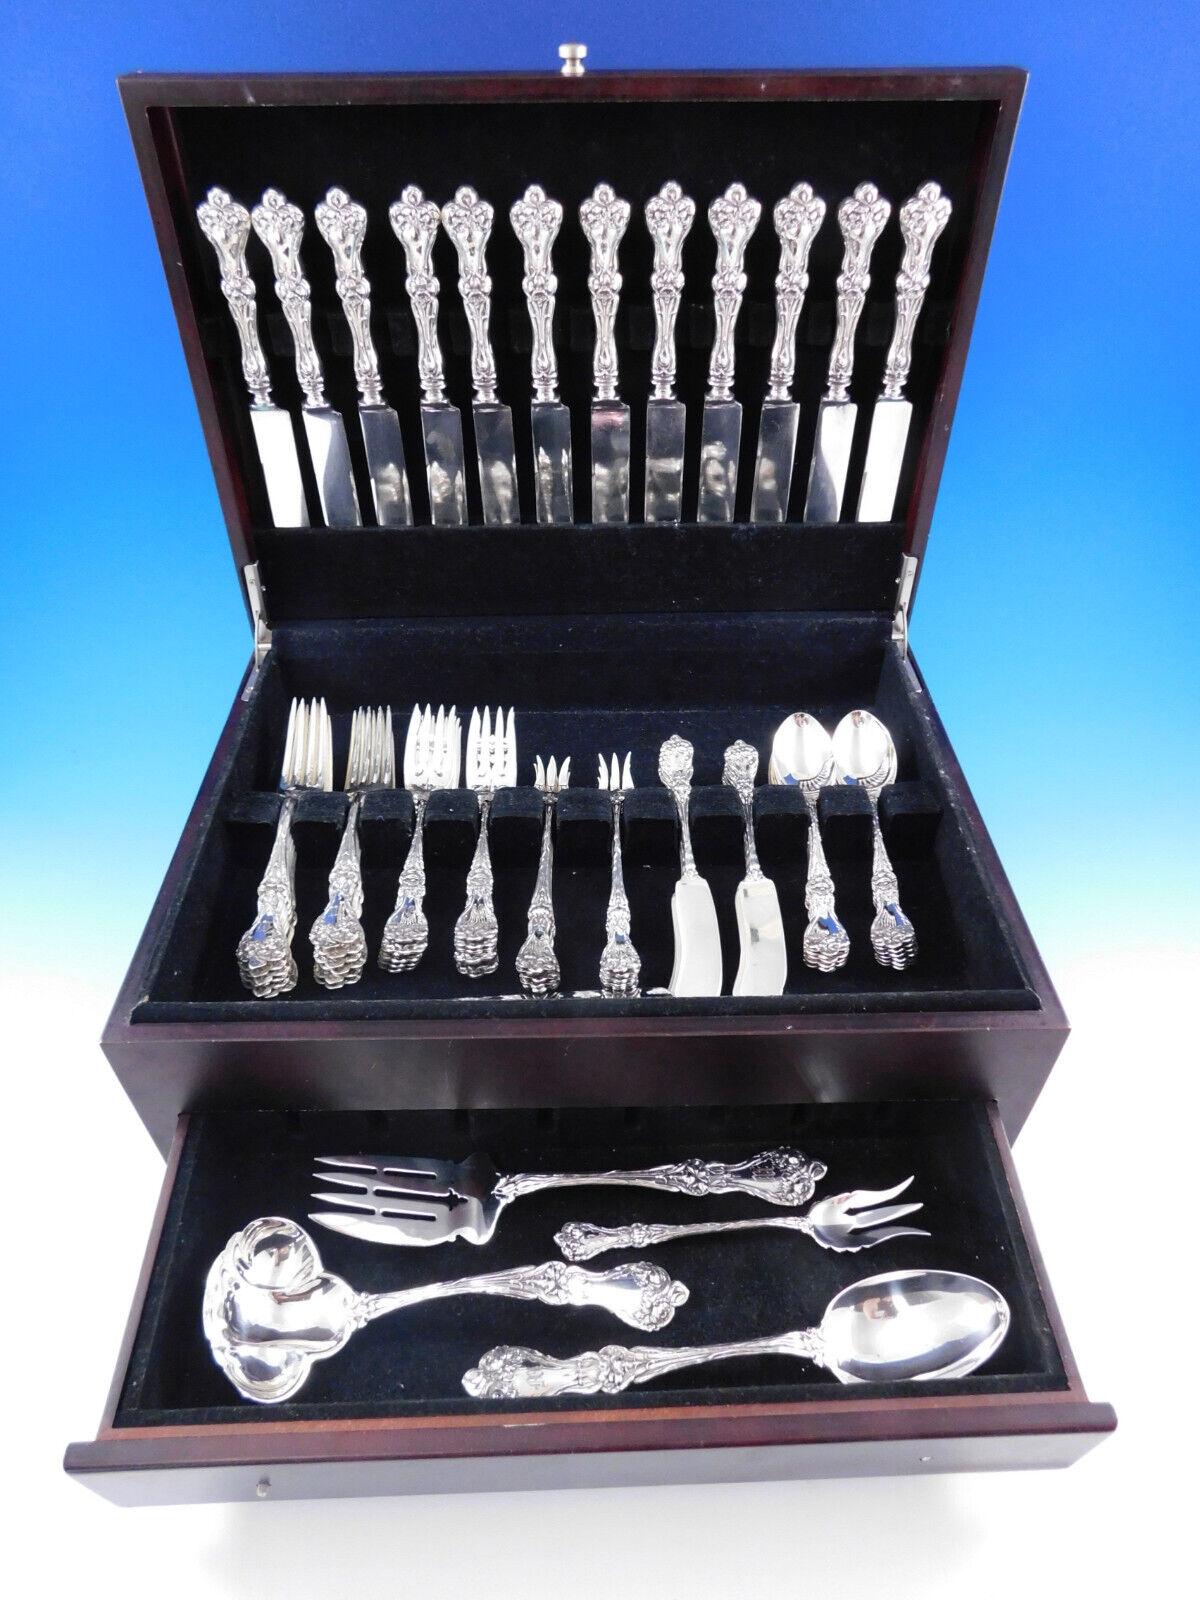 Beautiful Majestic by Alvin sterling Silver flatware set - 77 pieces. This floral multi-motif pattern was introduced in the year 1900. This set includes:


12 Knives with blunt silverplated blades, 8 3/4